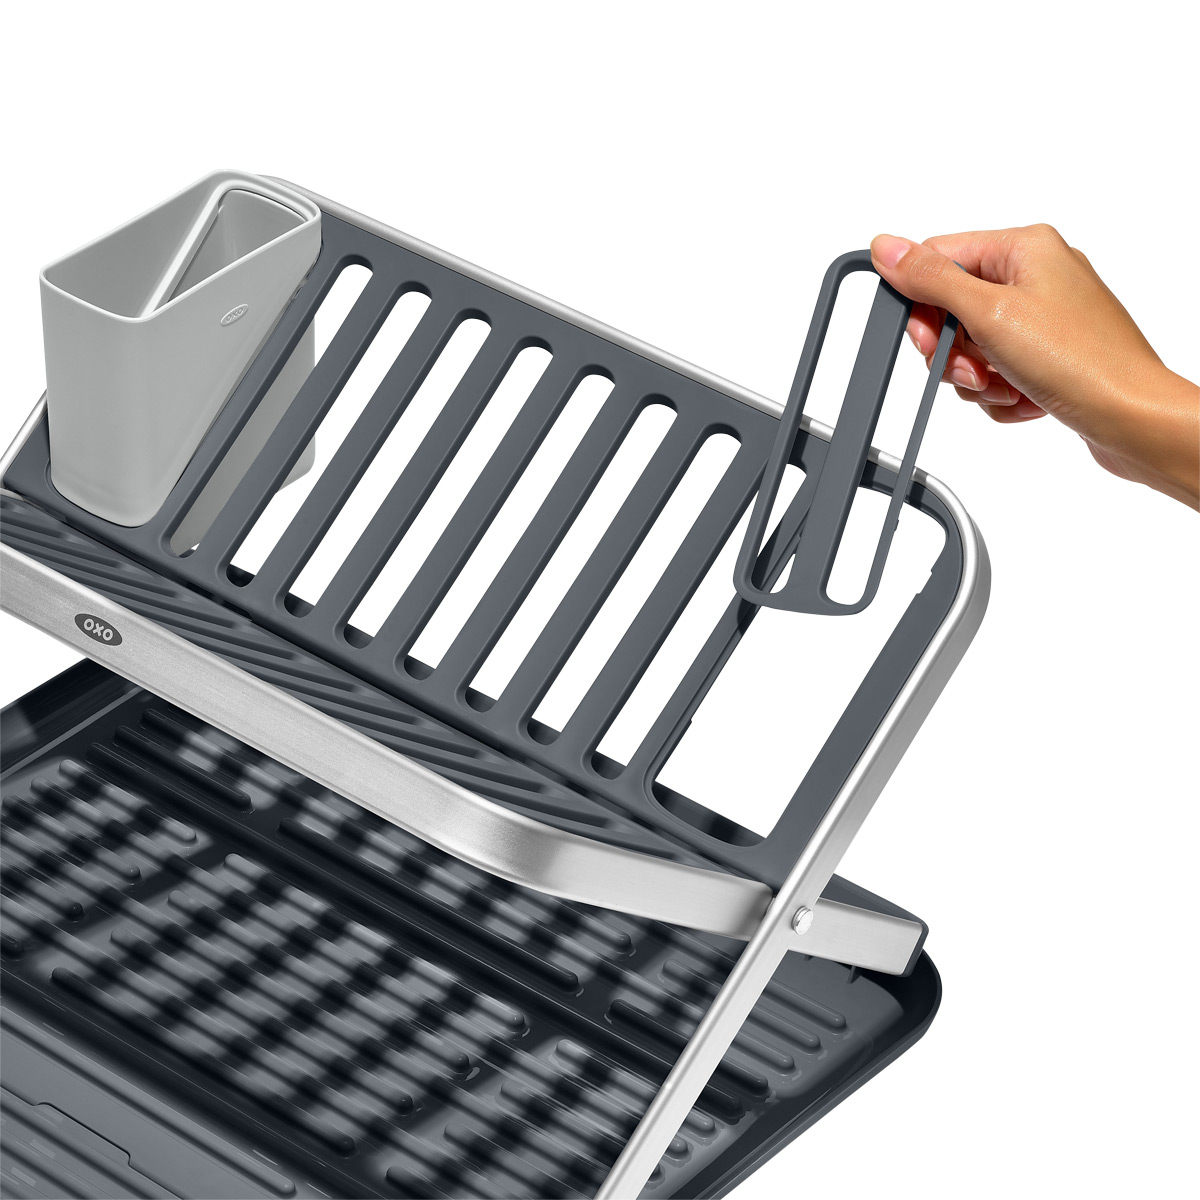 https://www.containerstore.com/catalogimages/443137/10088256-OXO-Aluminum-Fold-Flat-Dish.jpg